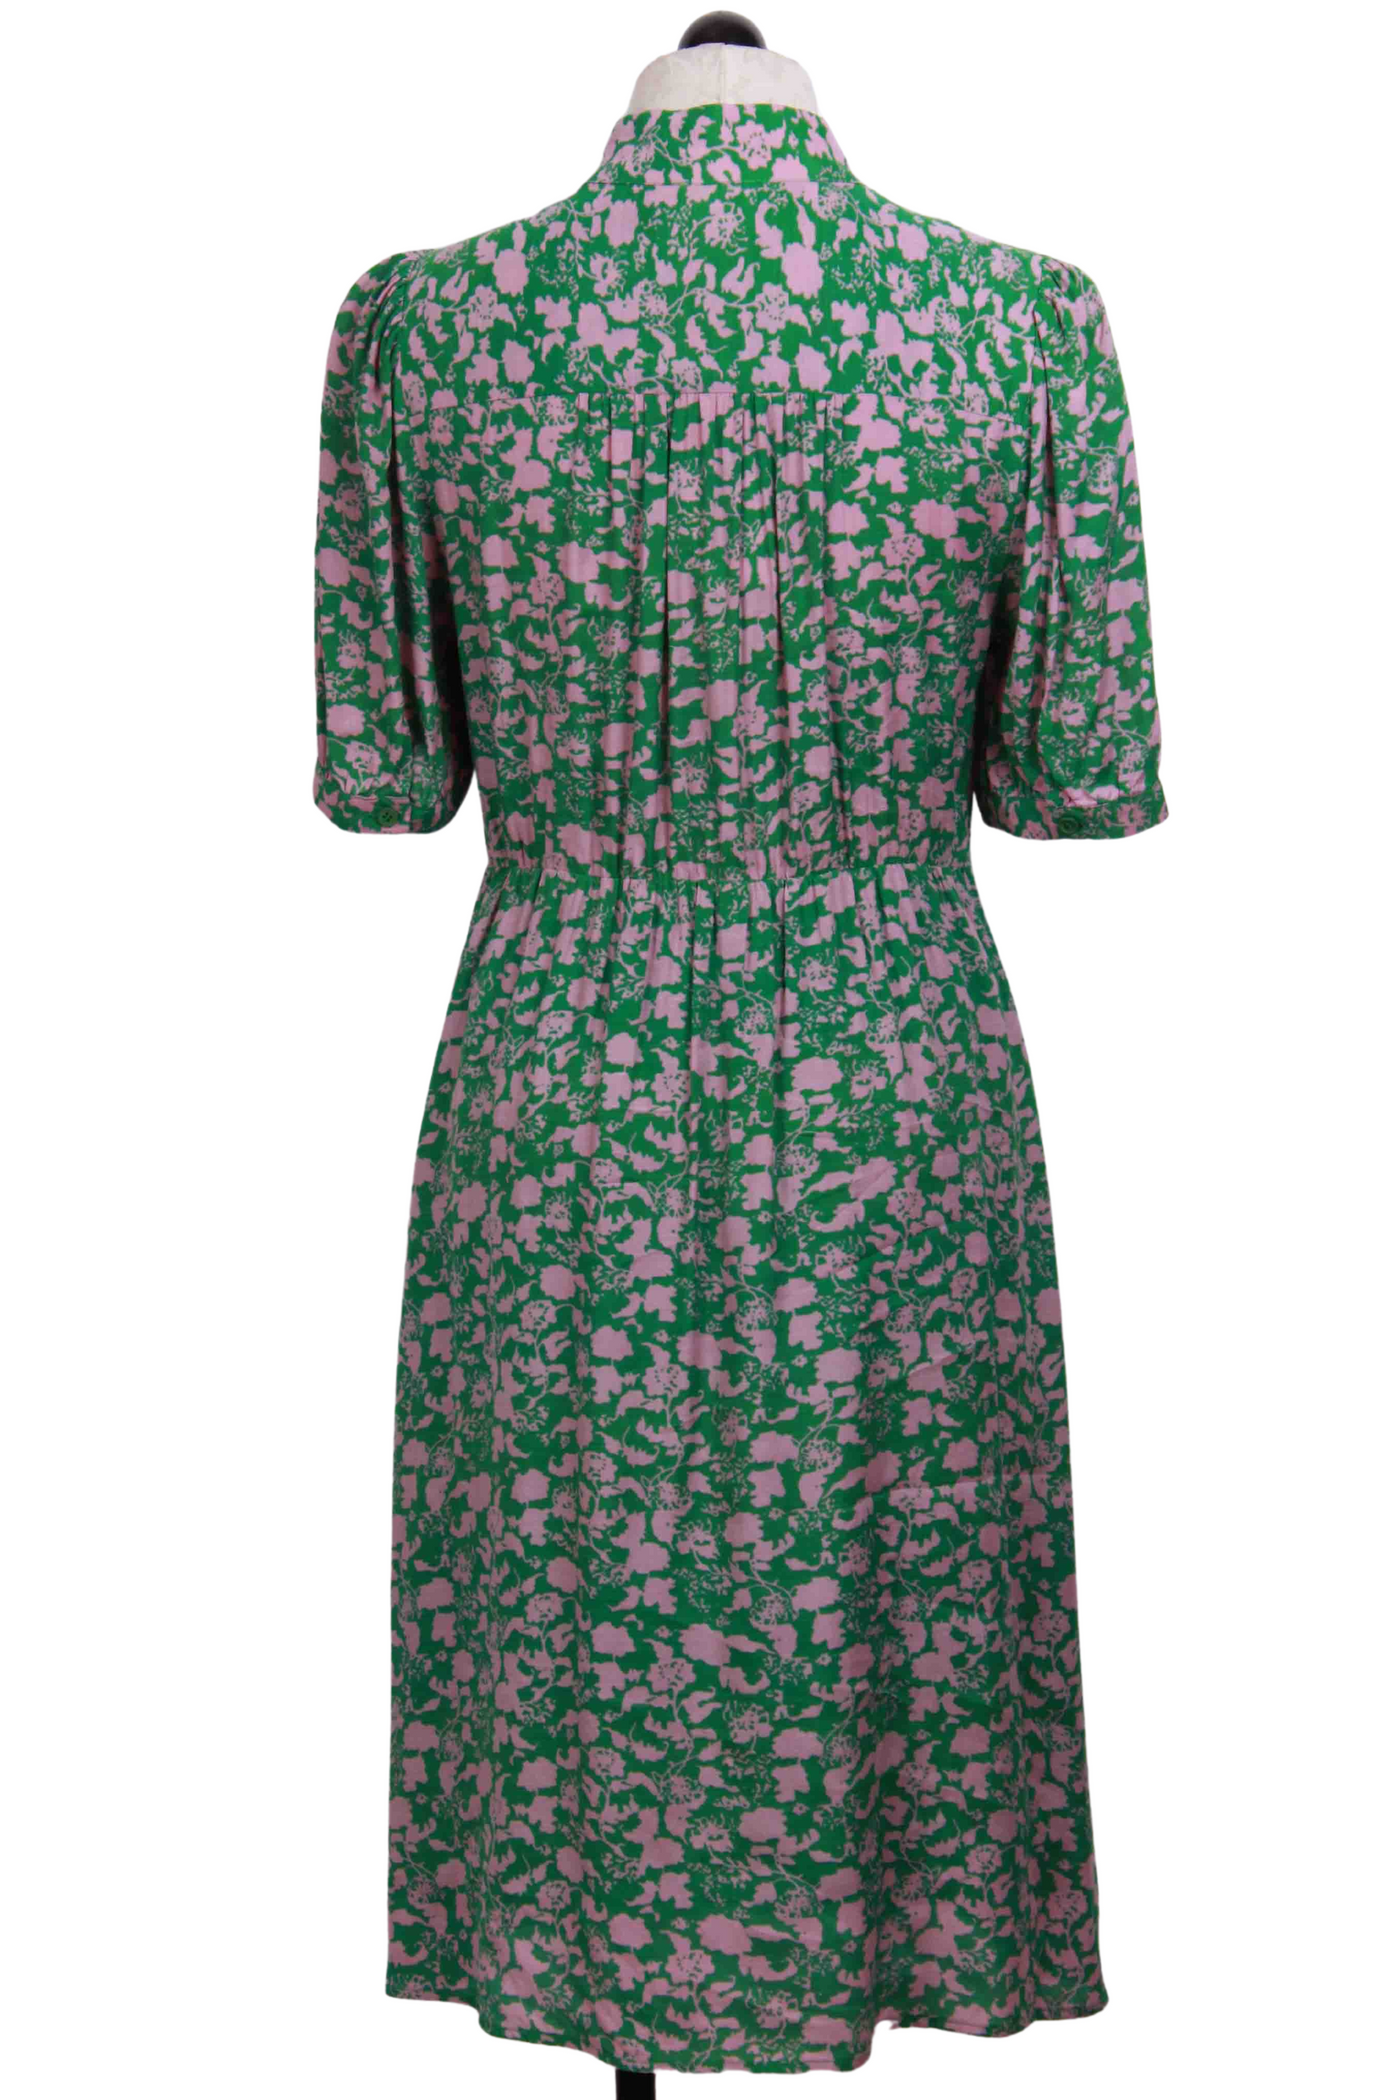 back view of Green and Pink Short Sleeve Floral Button Front Dress by The Korner